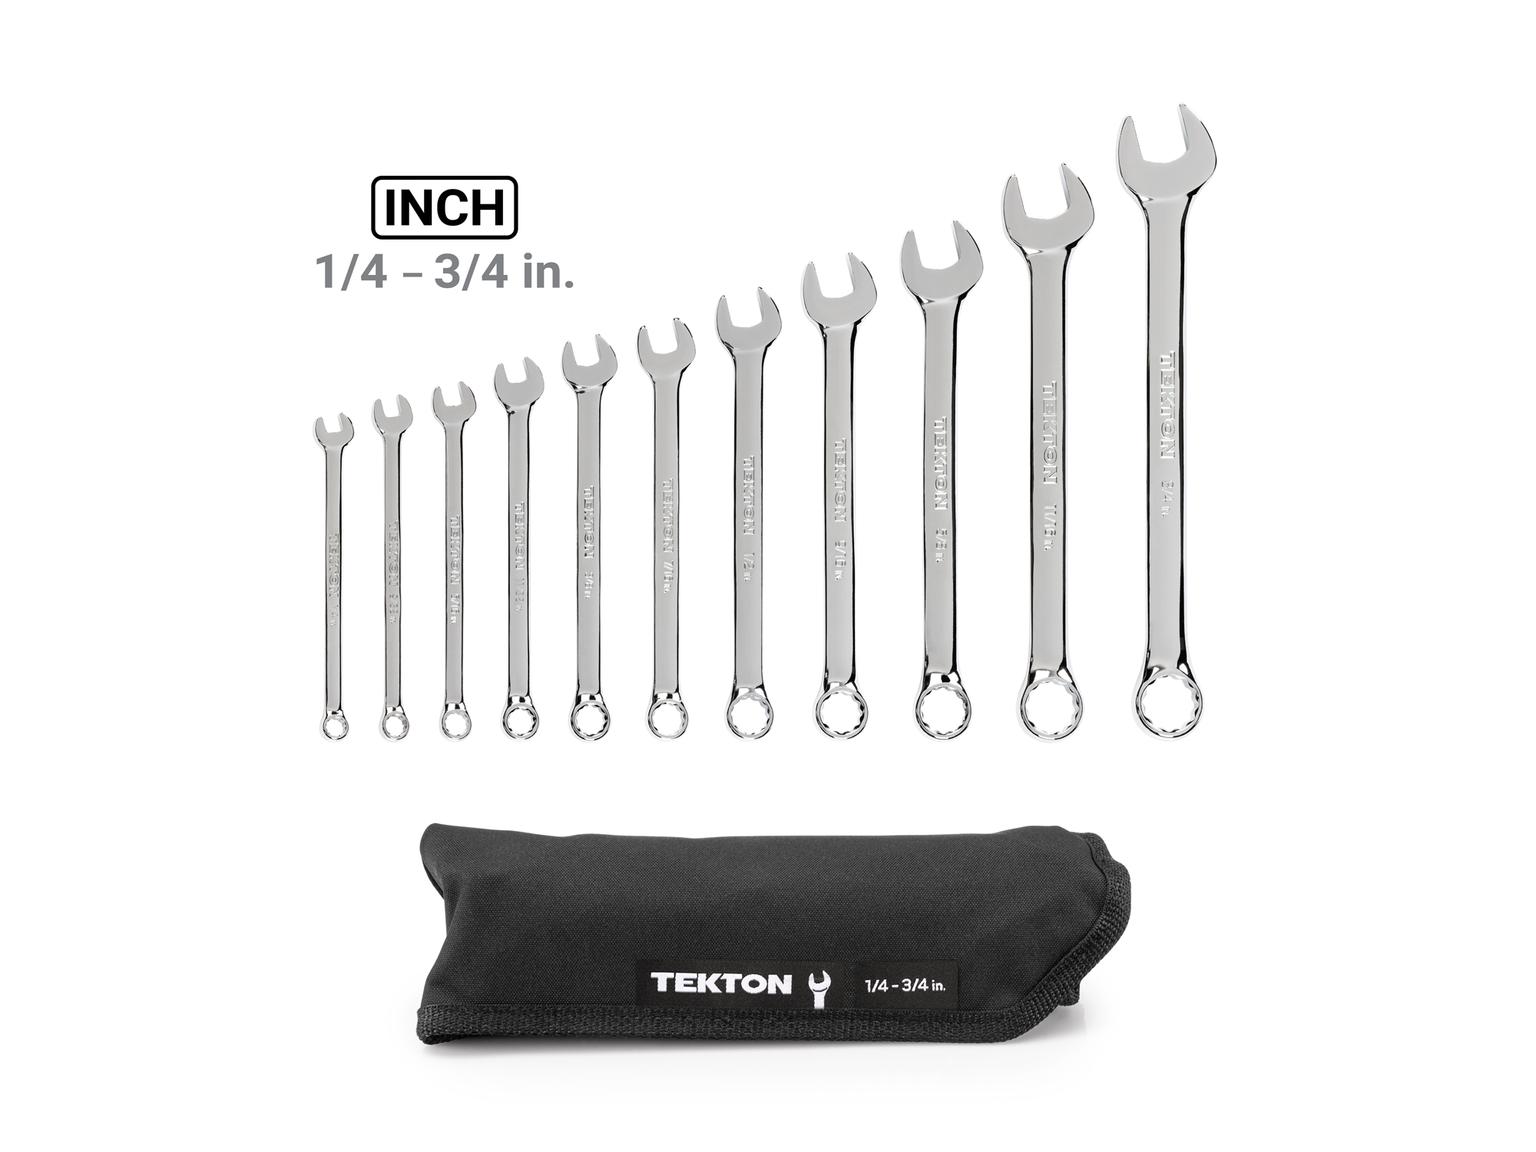 TEKTON WCB94101-T Combination Wrench Set with Pouch, 11-Piece (1/4 - 3/4 in.)